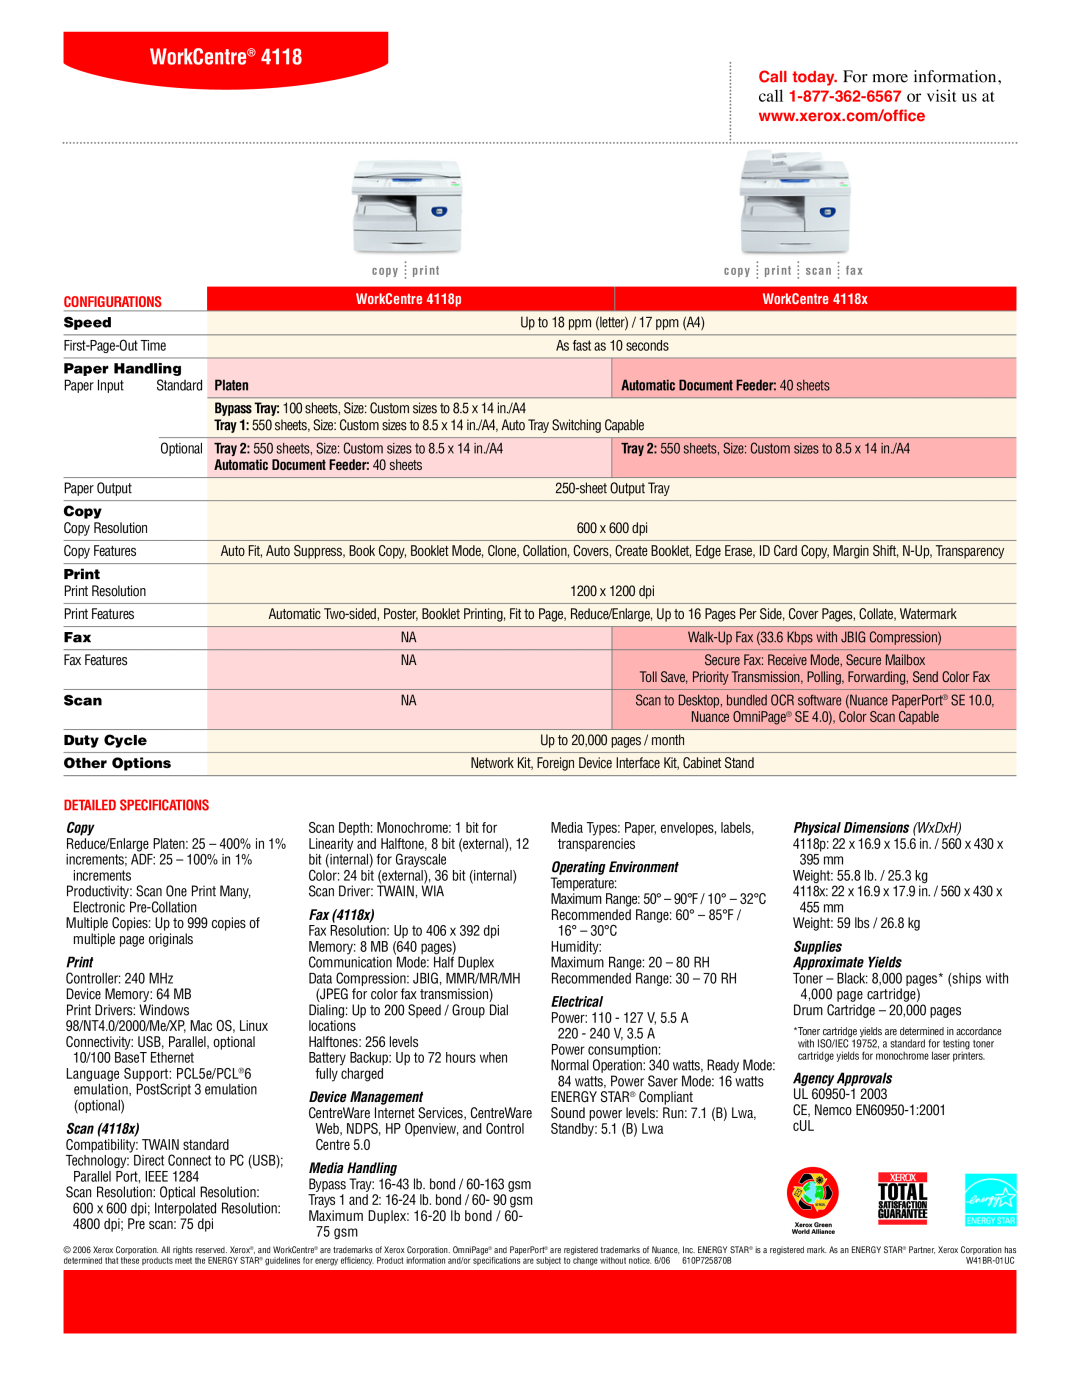 Xerox manual Configurations, WorkCentre 4118p, Detailed Specifications 